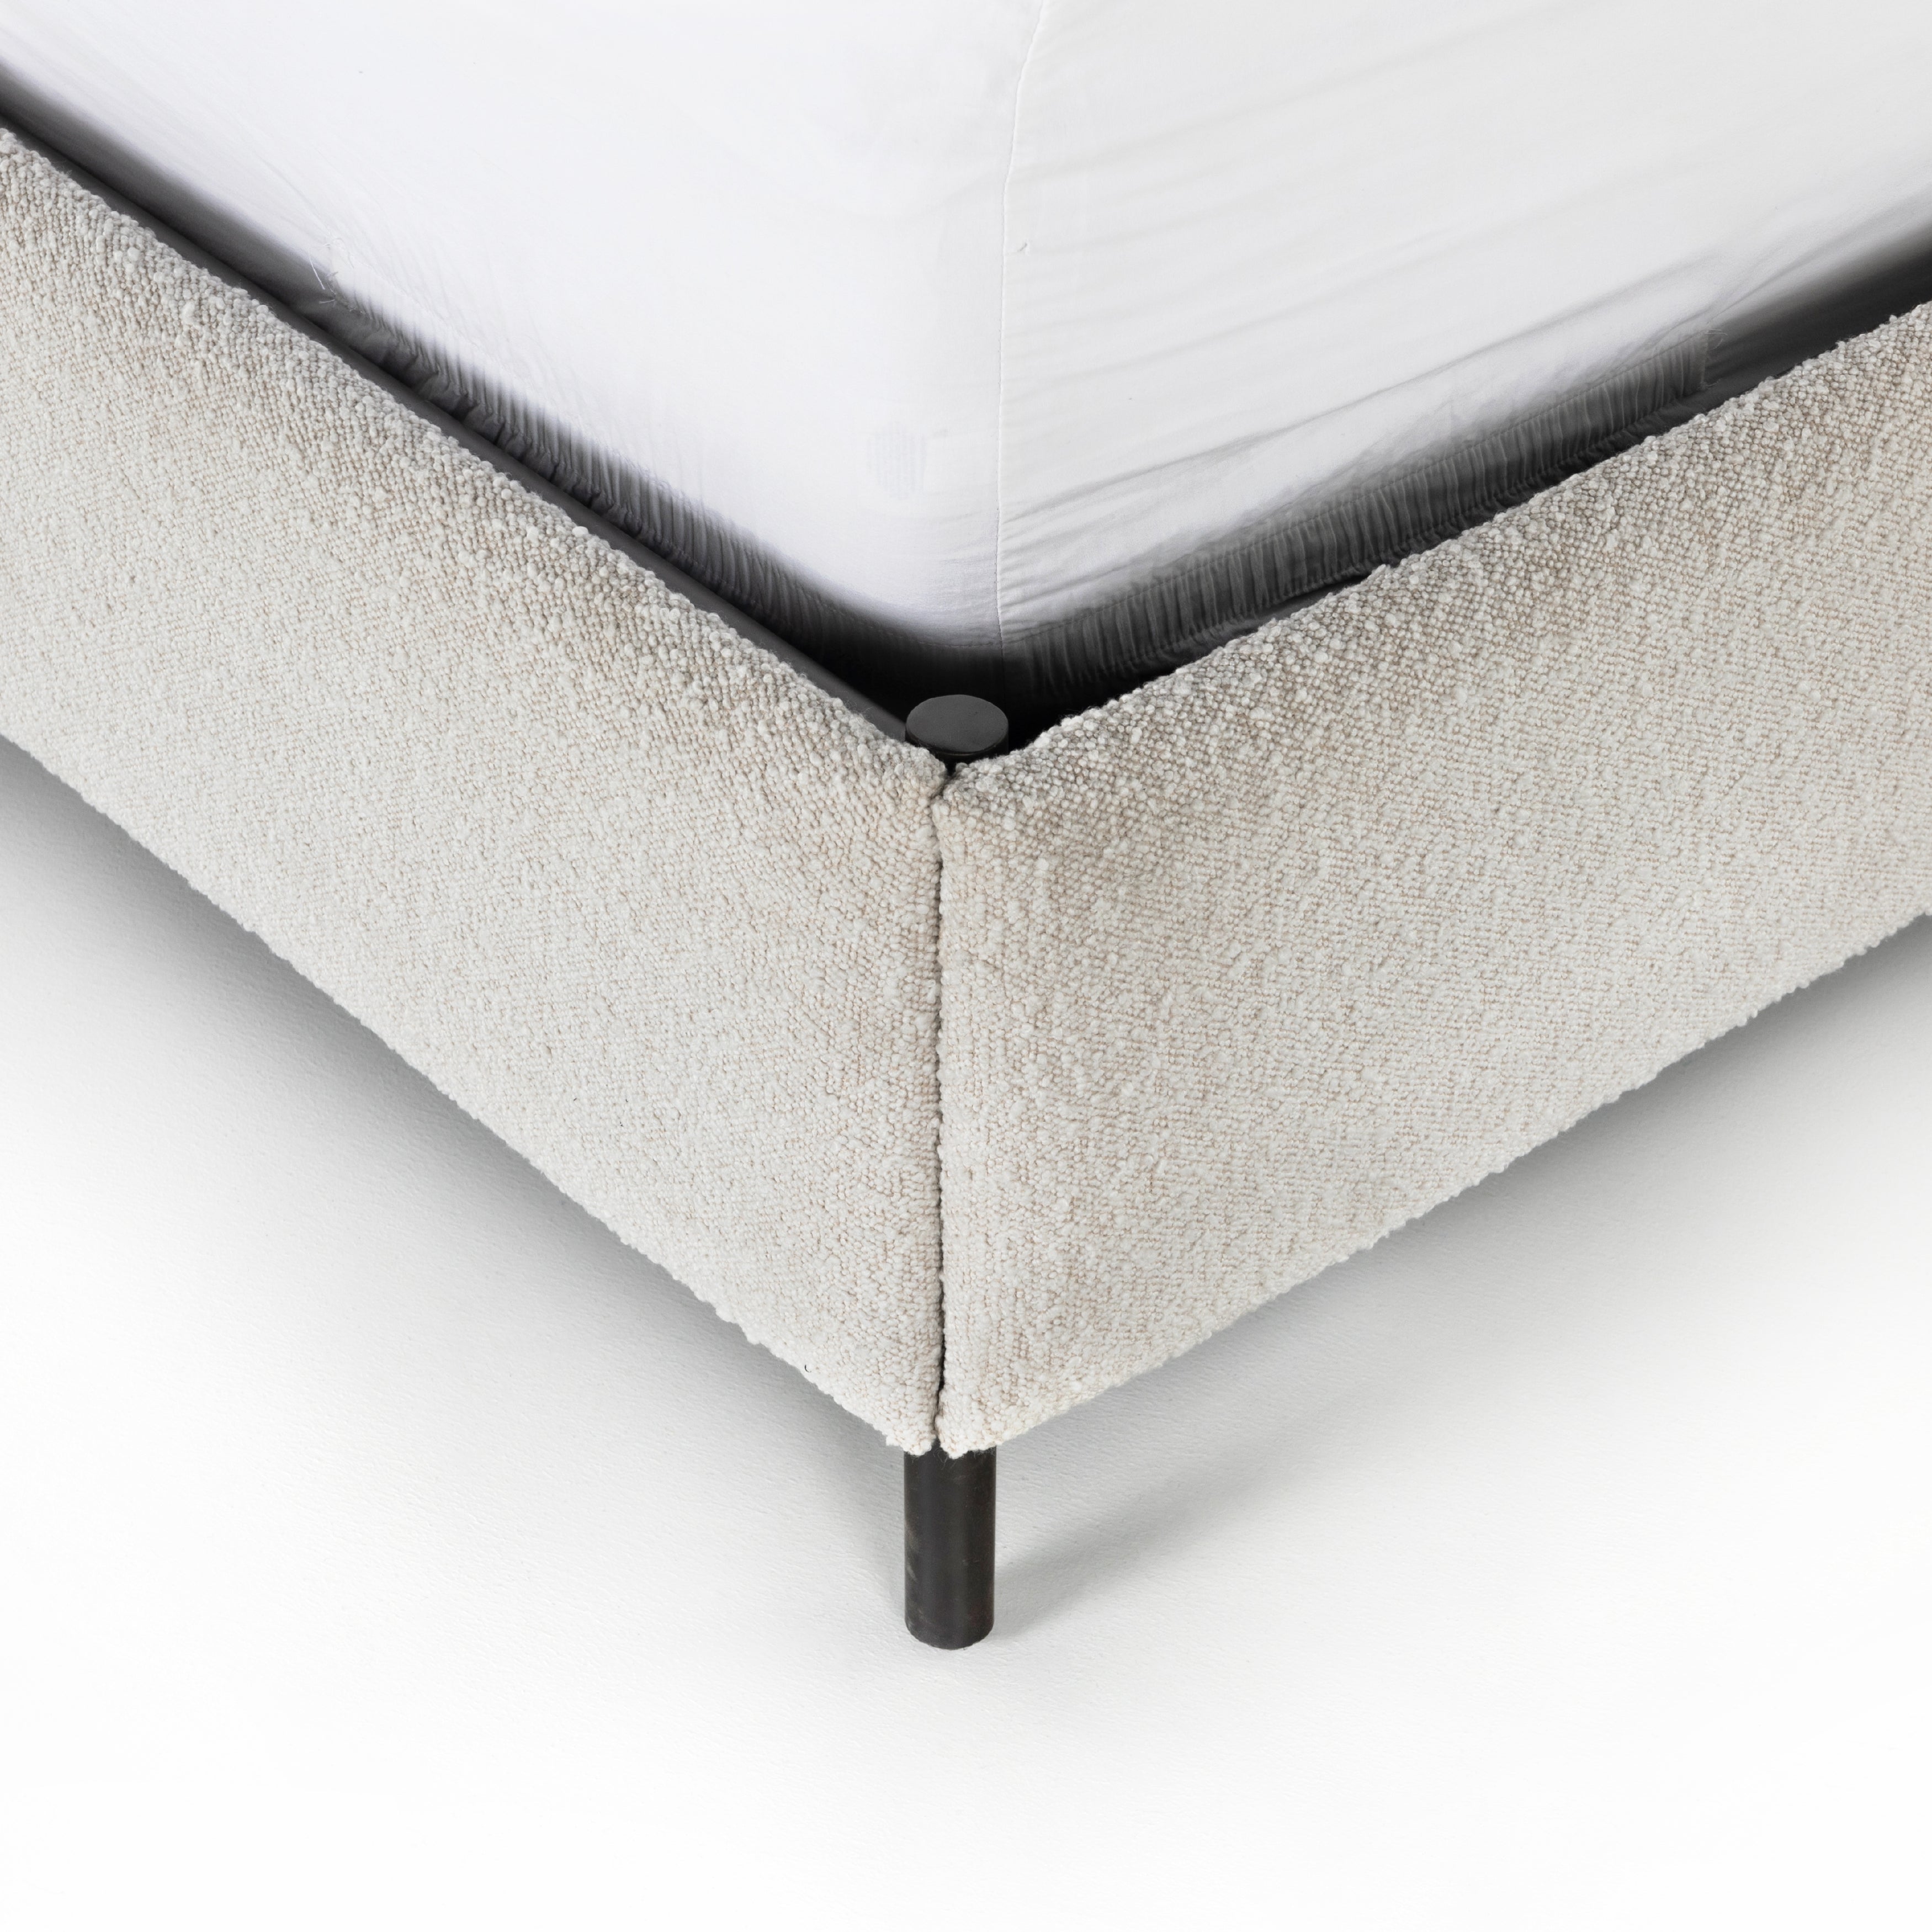 Bring texture into play. Upholstered in a classic cream-colored boucle, with decorative leather straps adding a material-driven touch with contrast. Standard box spring required. Amethyst Home provides interior design services, furniture, rugs, and lighting in the Monterey metro area.